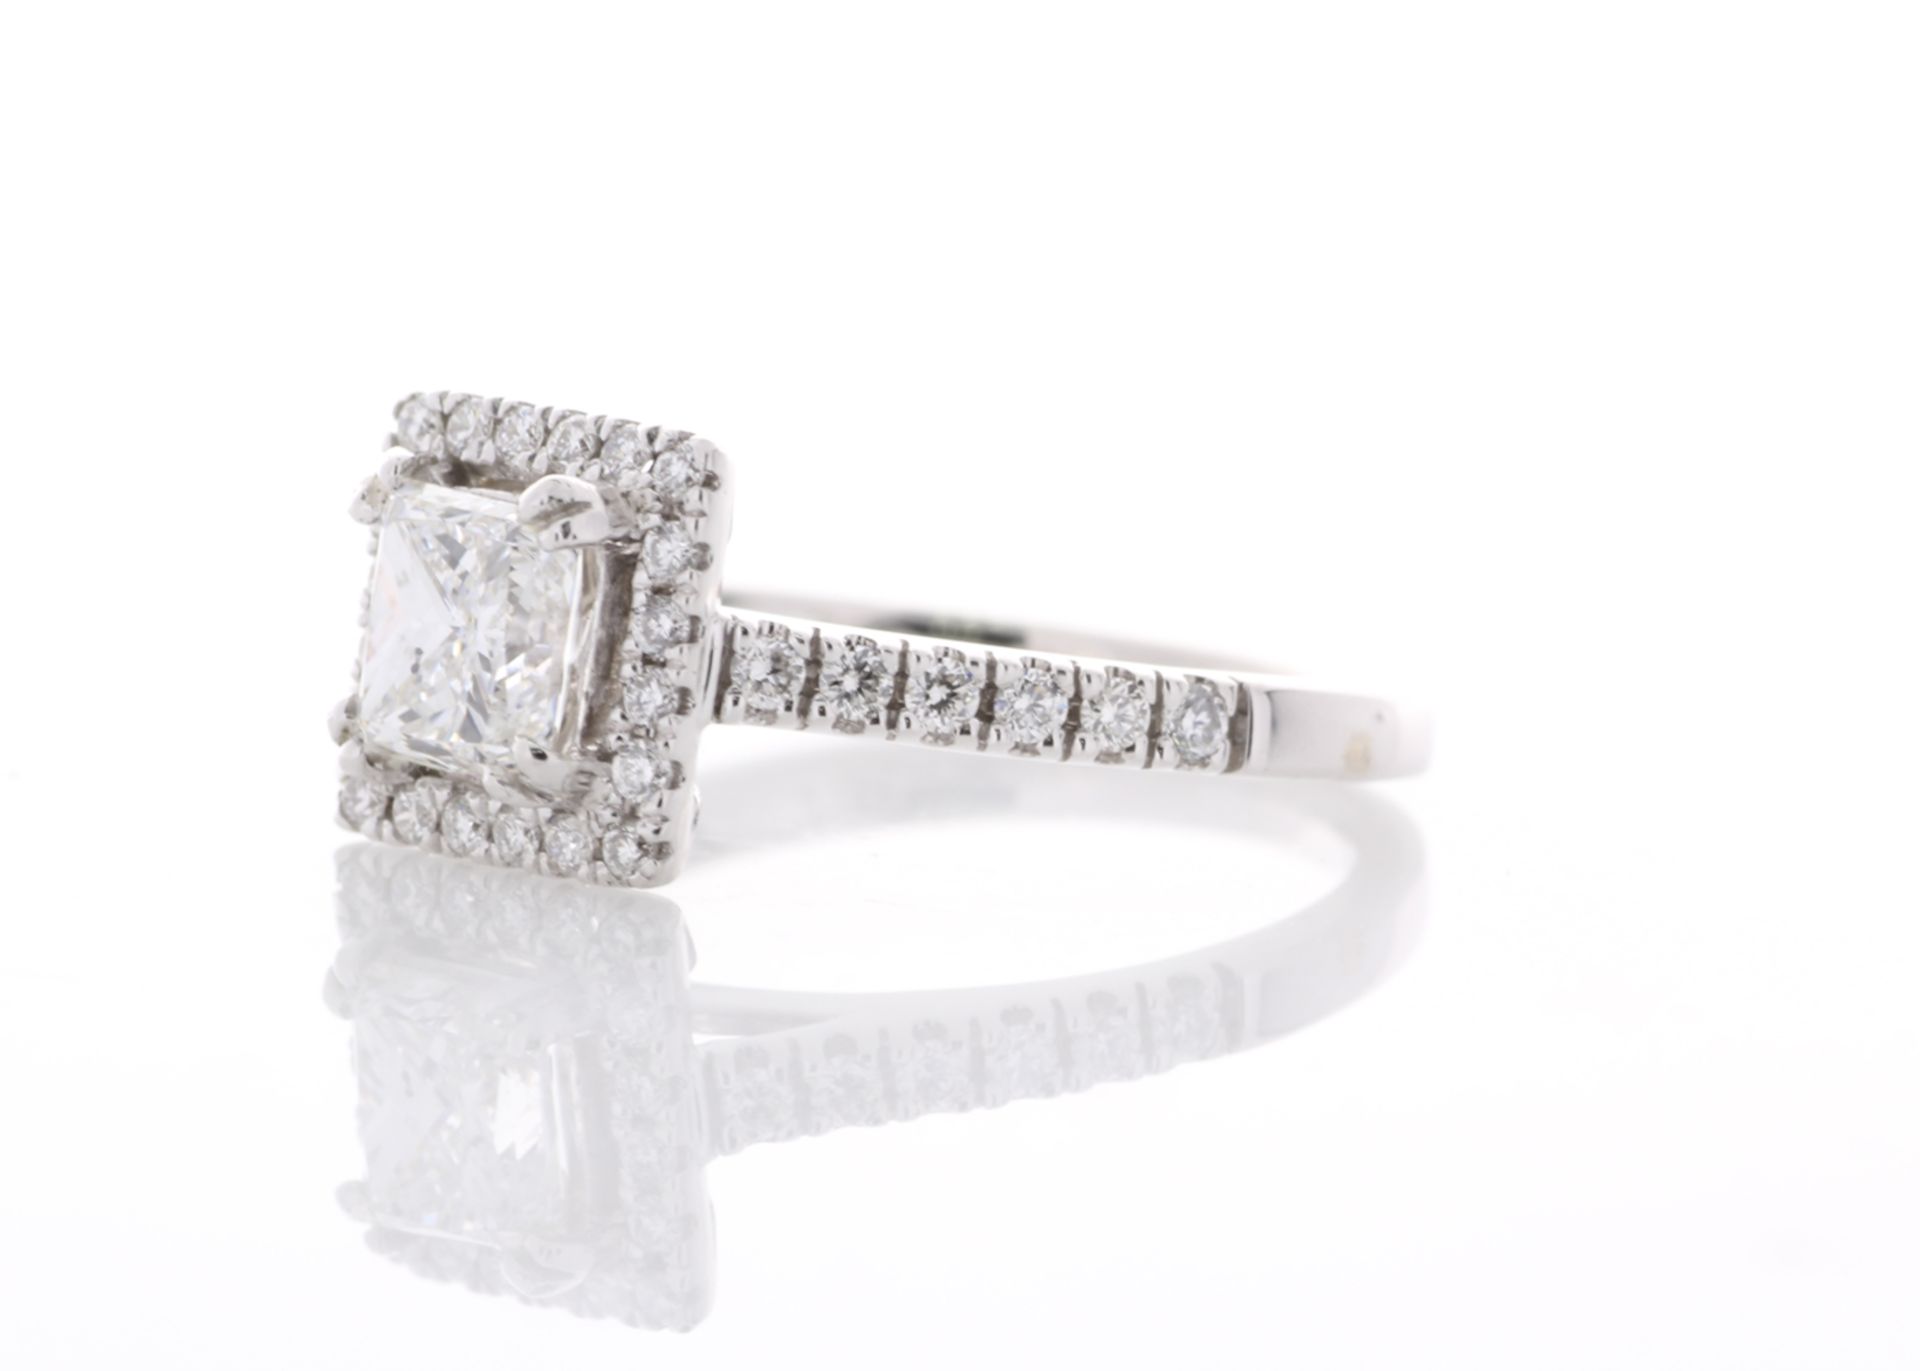 18ct White Gold Single Stone Princess Cut Diamond Ring (1.00) 1.34 Carats - Valued by GIE £22,950.00 - Image 2 of 5